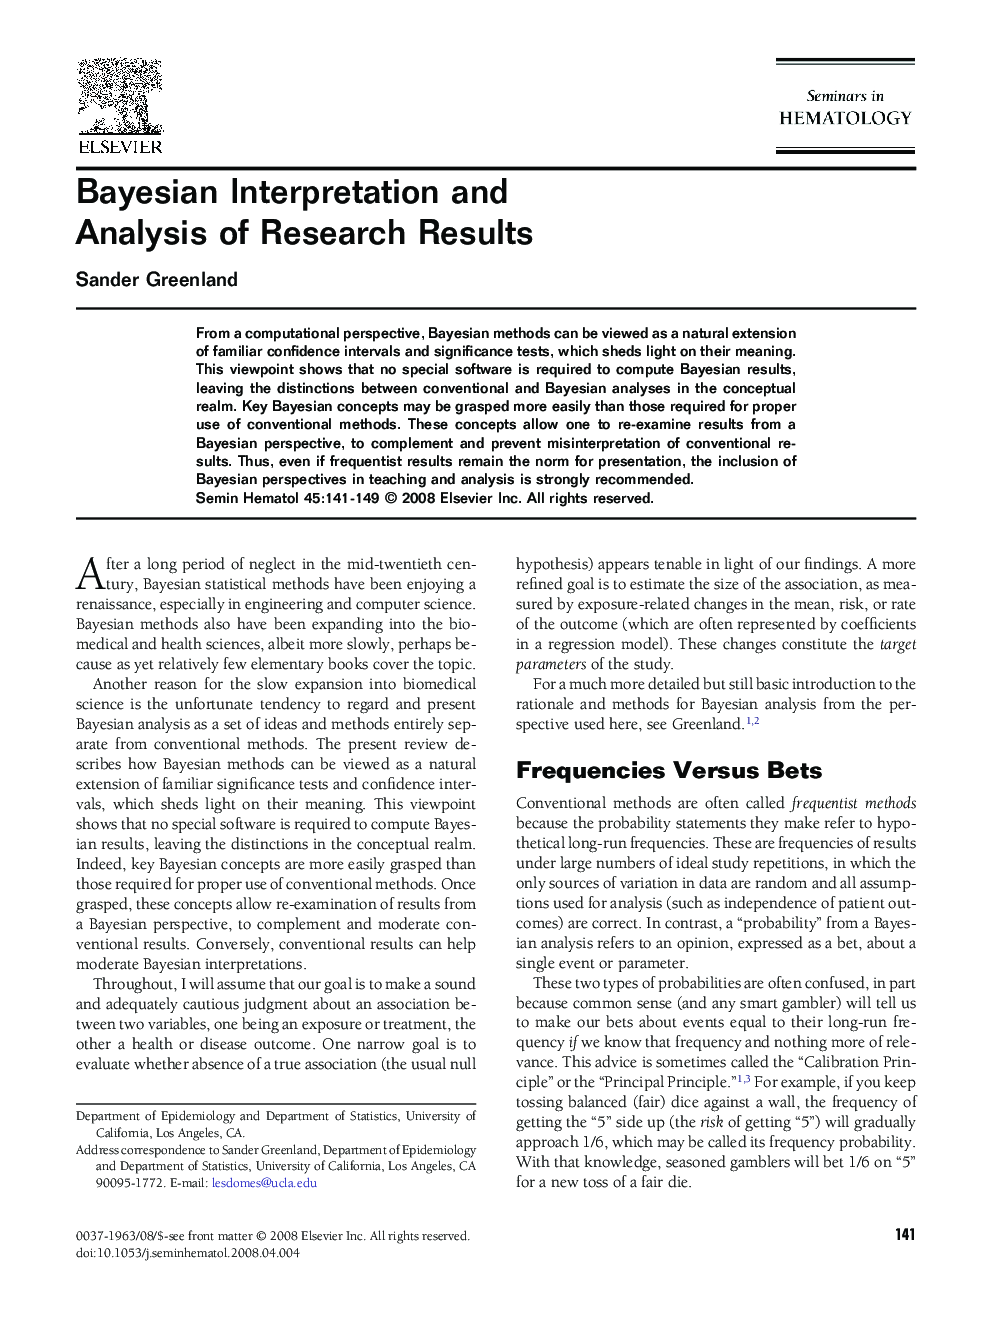 Bayesian Interpretation and Analysis of Research Results